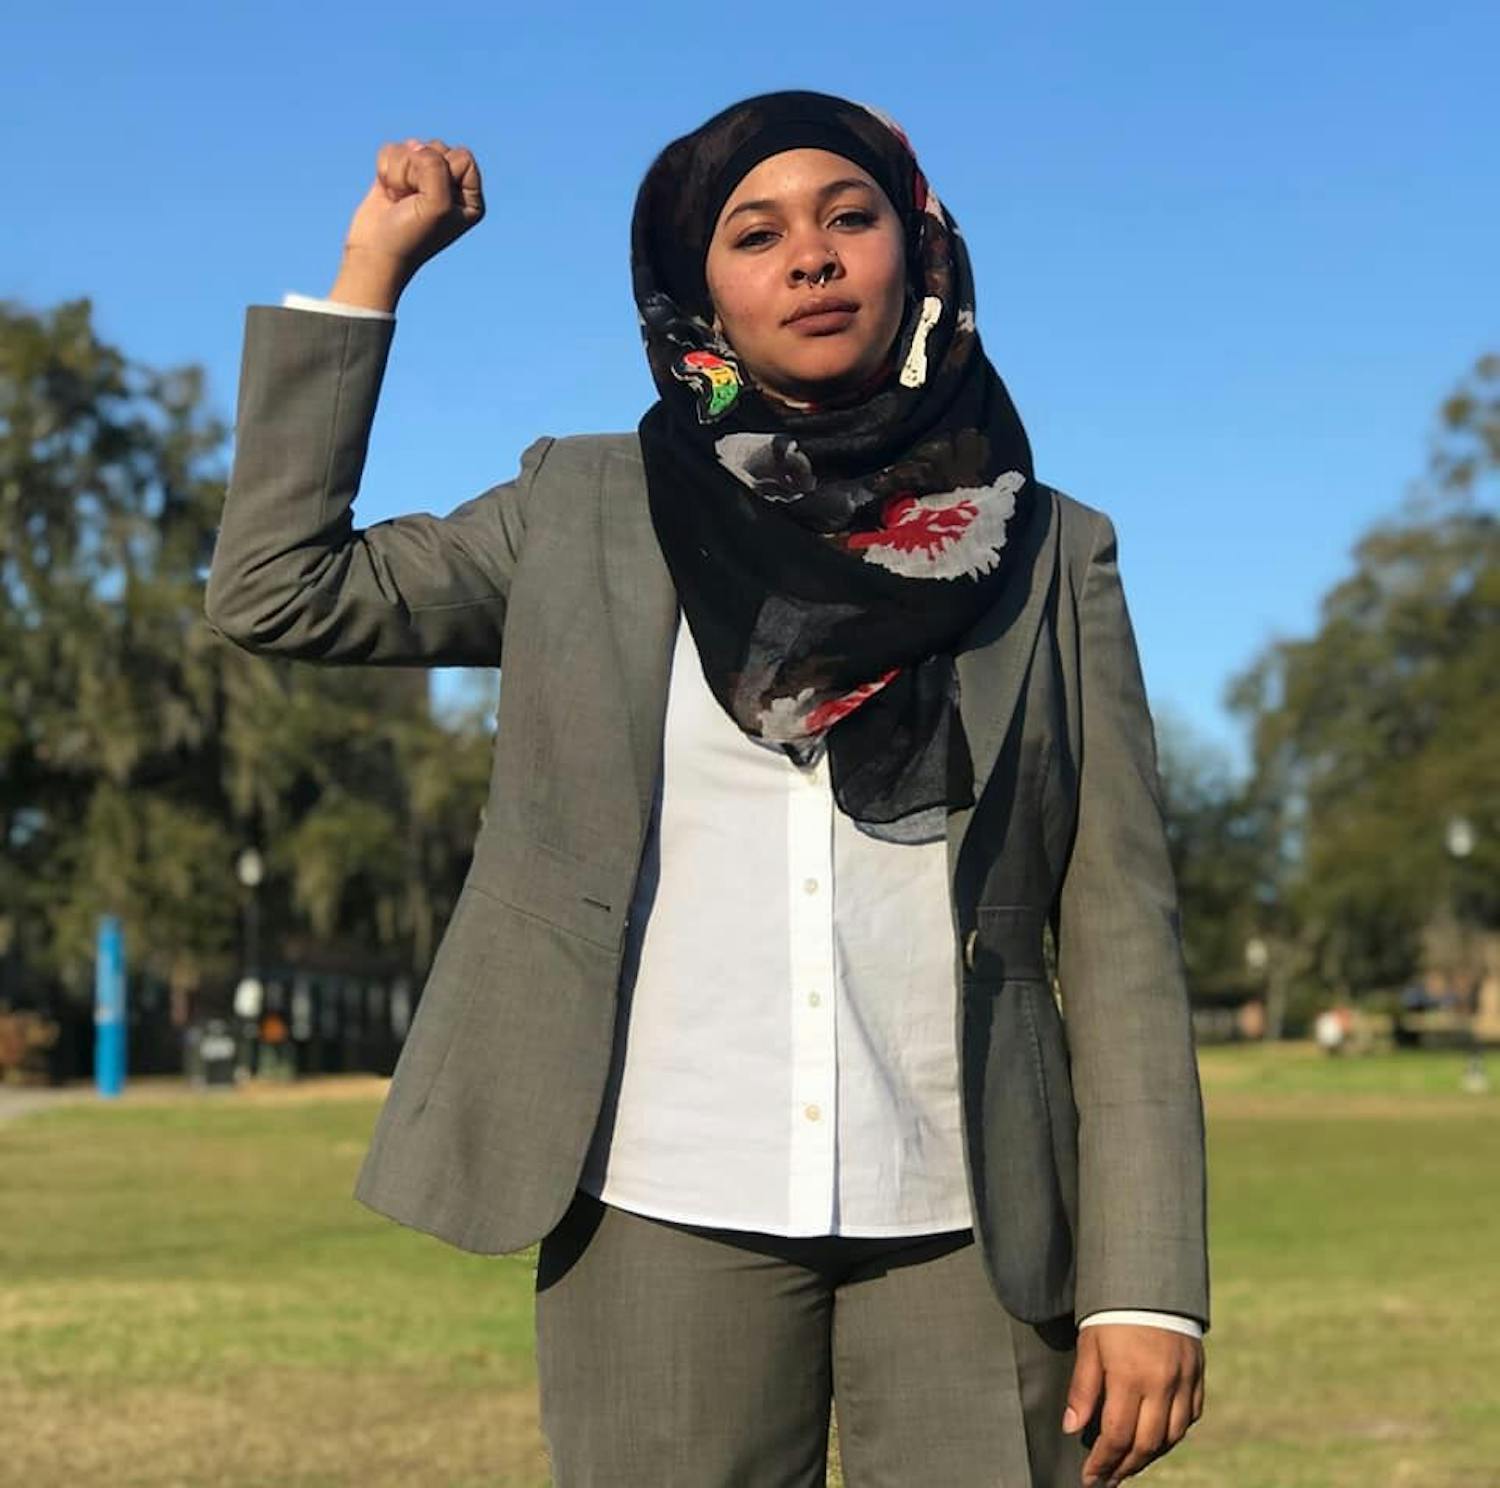 Kalimah Ujaama, a 22-year-old UF political science senior, performs spoken word as Lady K, an ultimate warrior for the people.